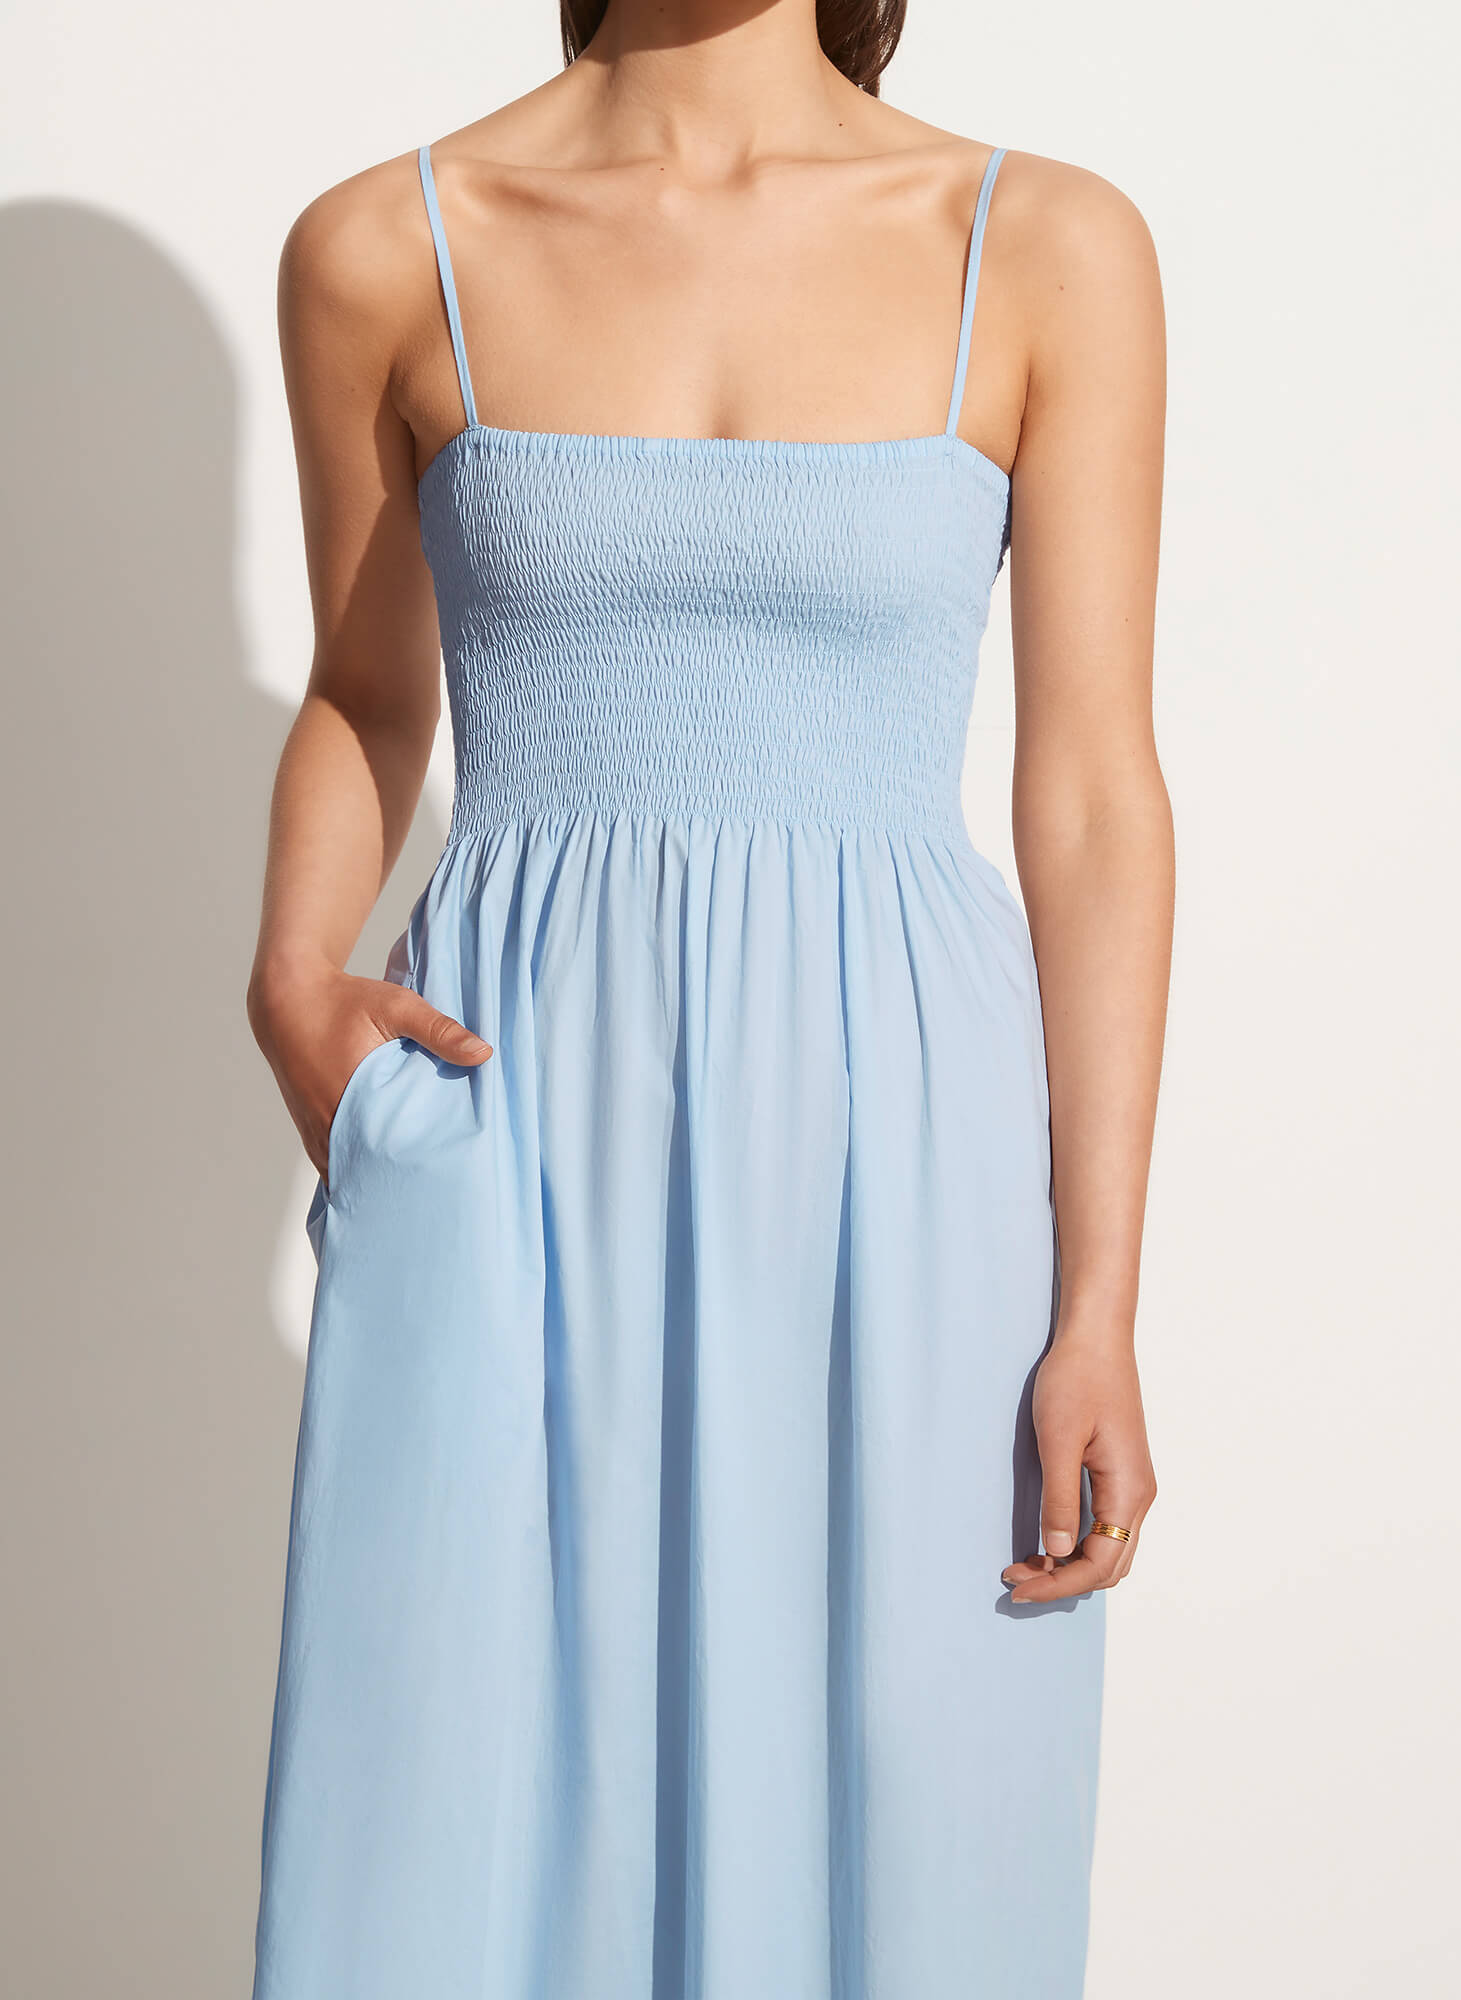 Faithfull The Brand Tergu Maxi Dress in Cornflower Blue available at The New Trend